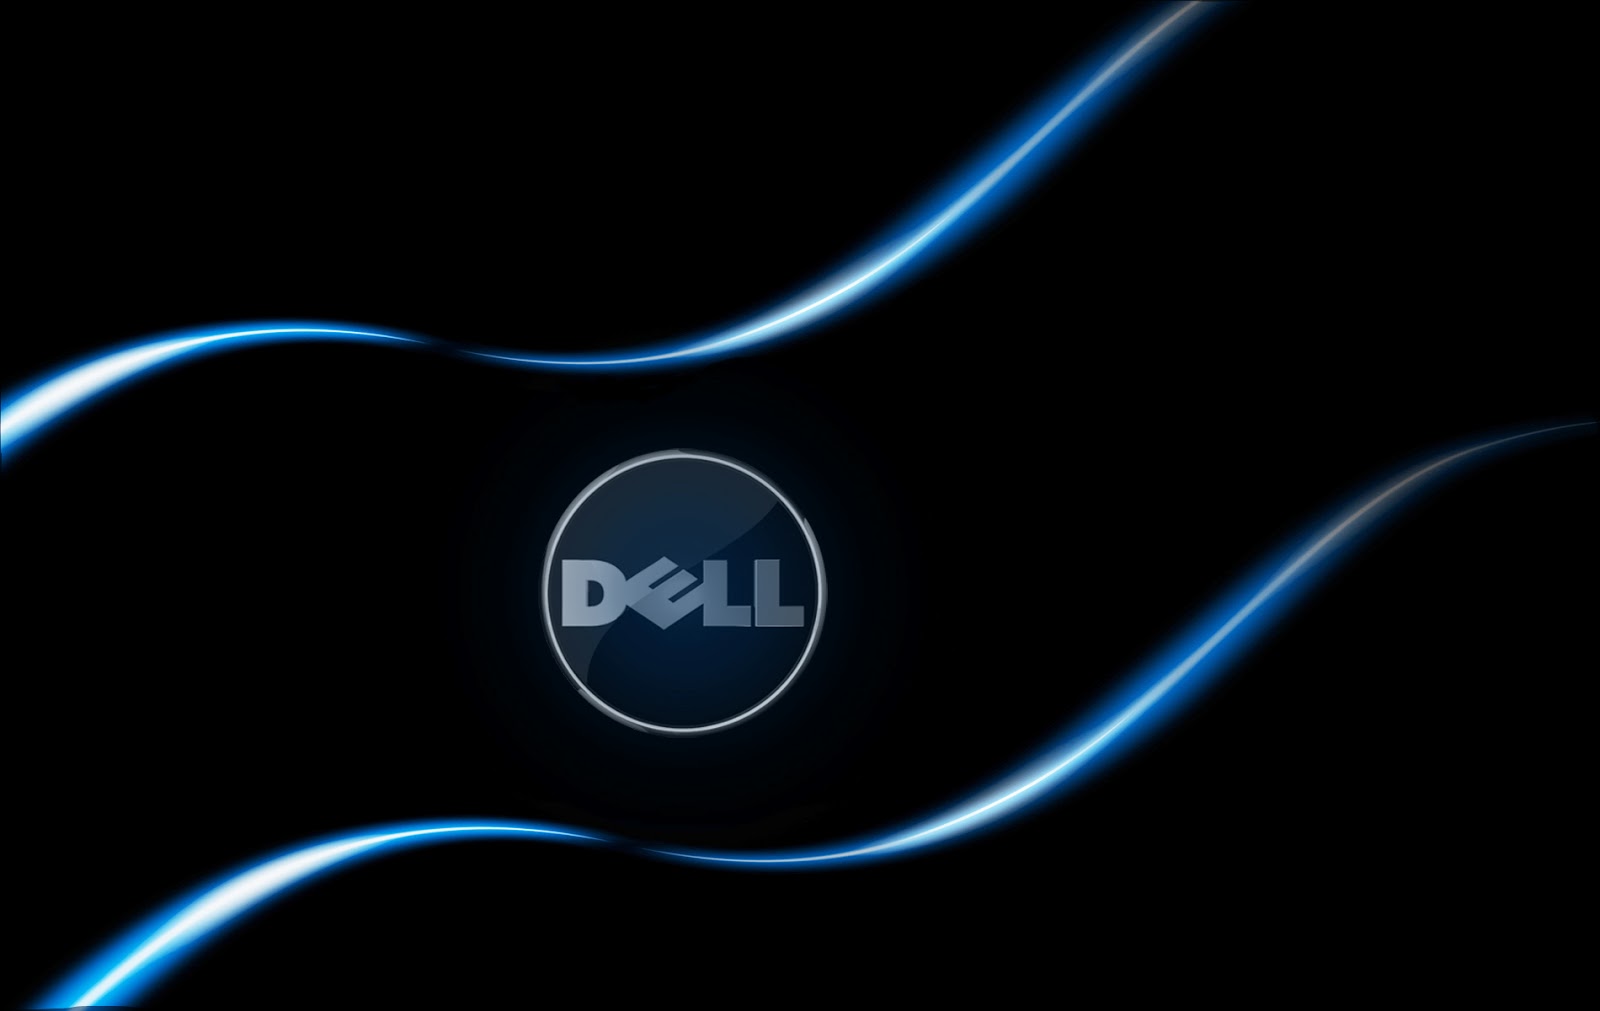 HD Wallpaper For Dell Laptop